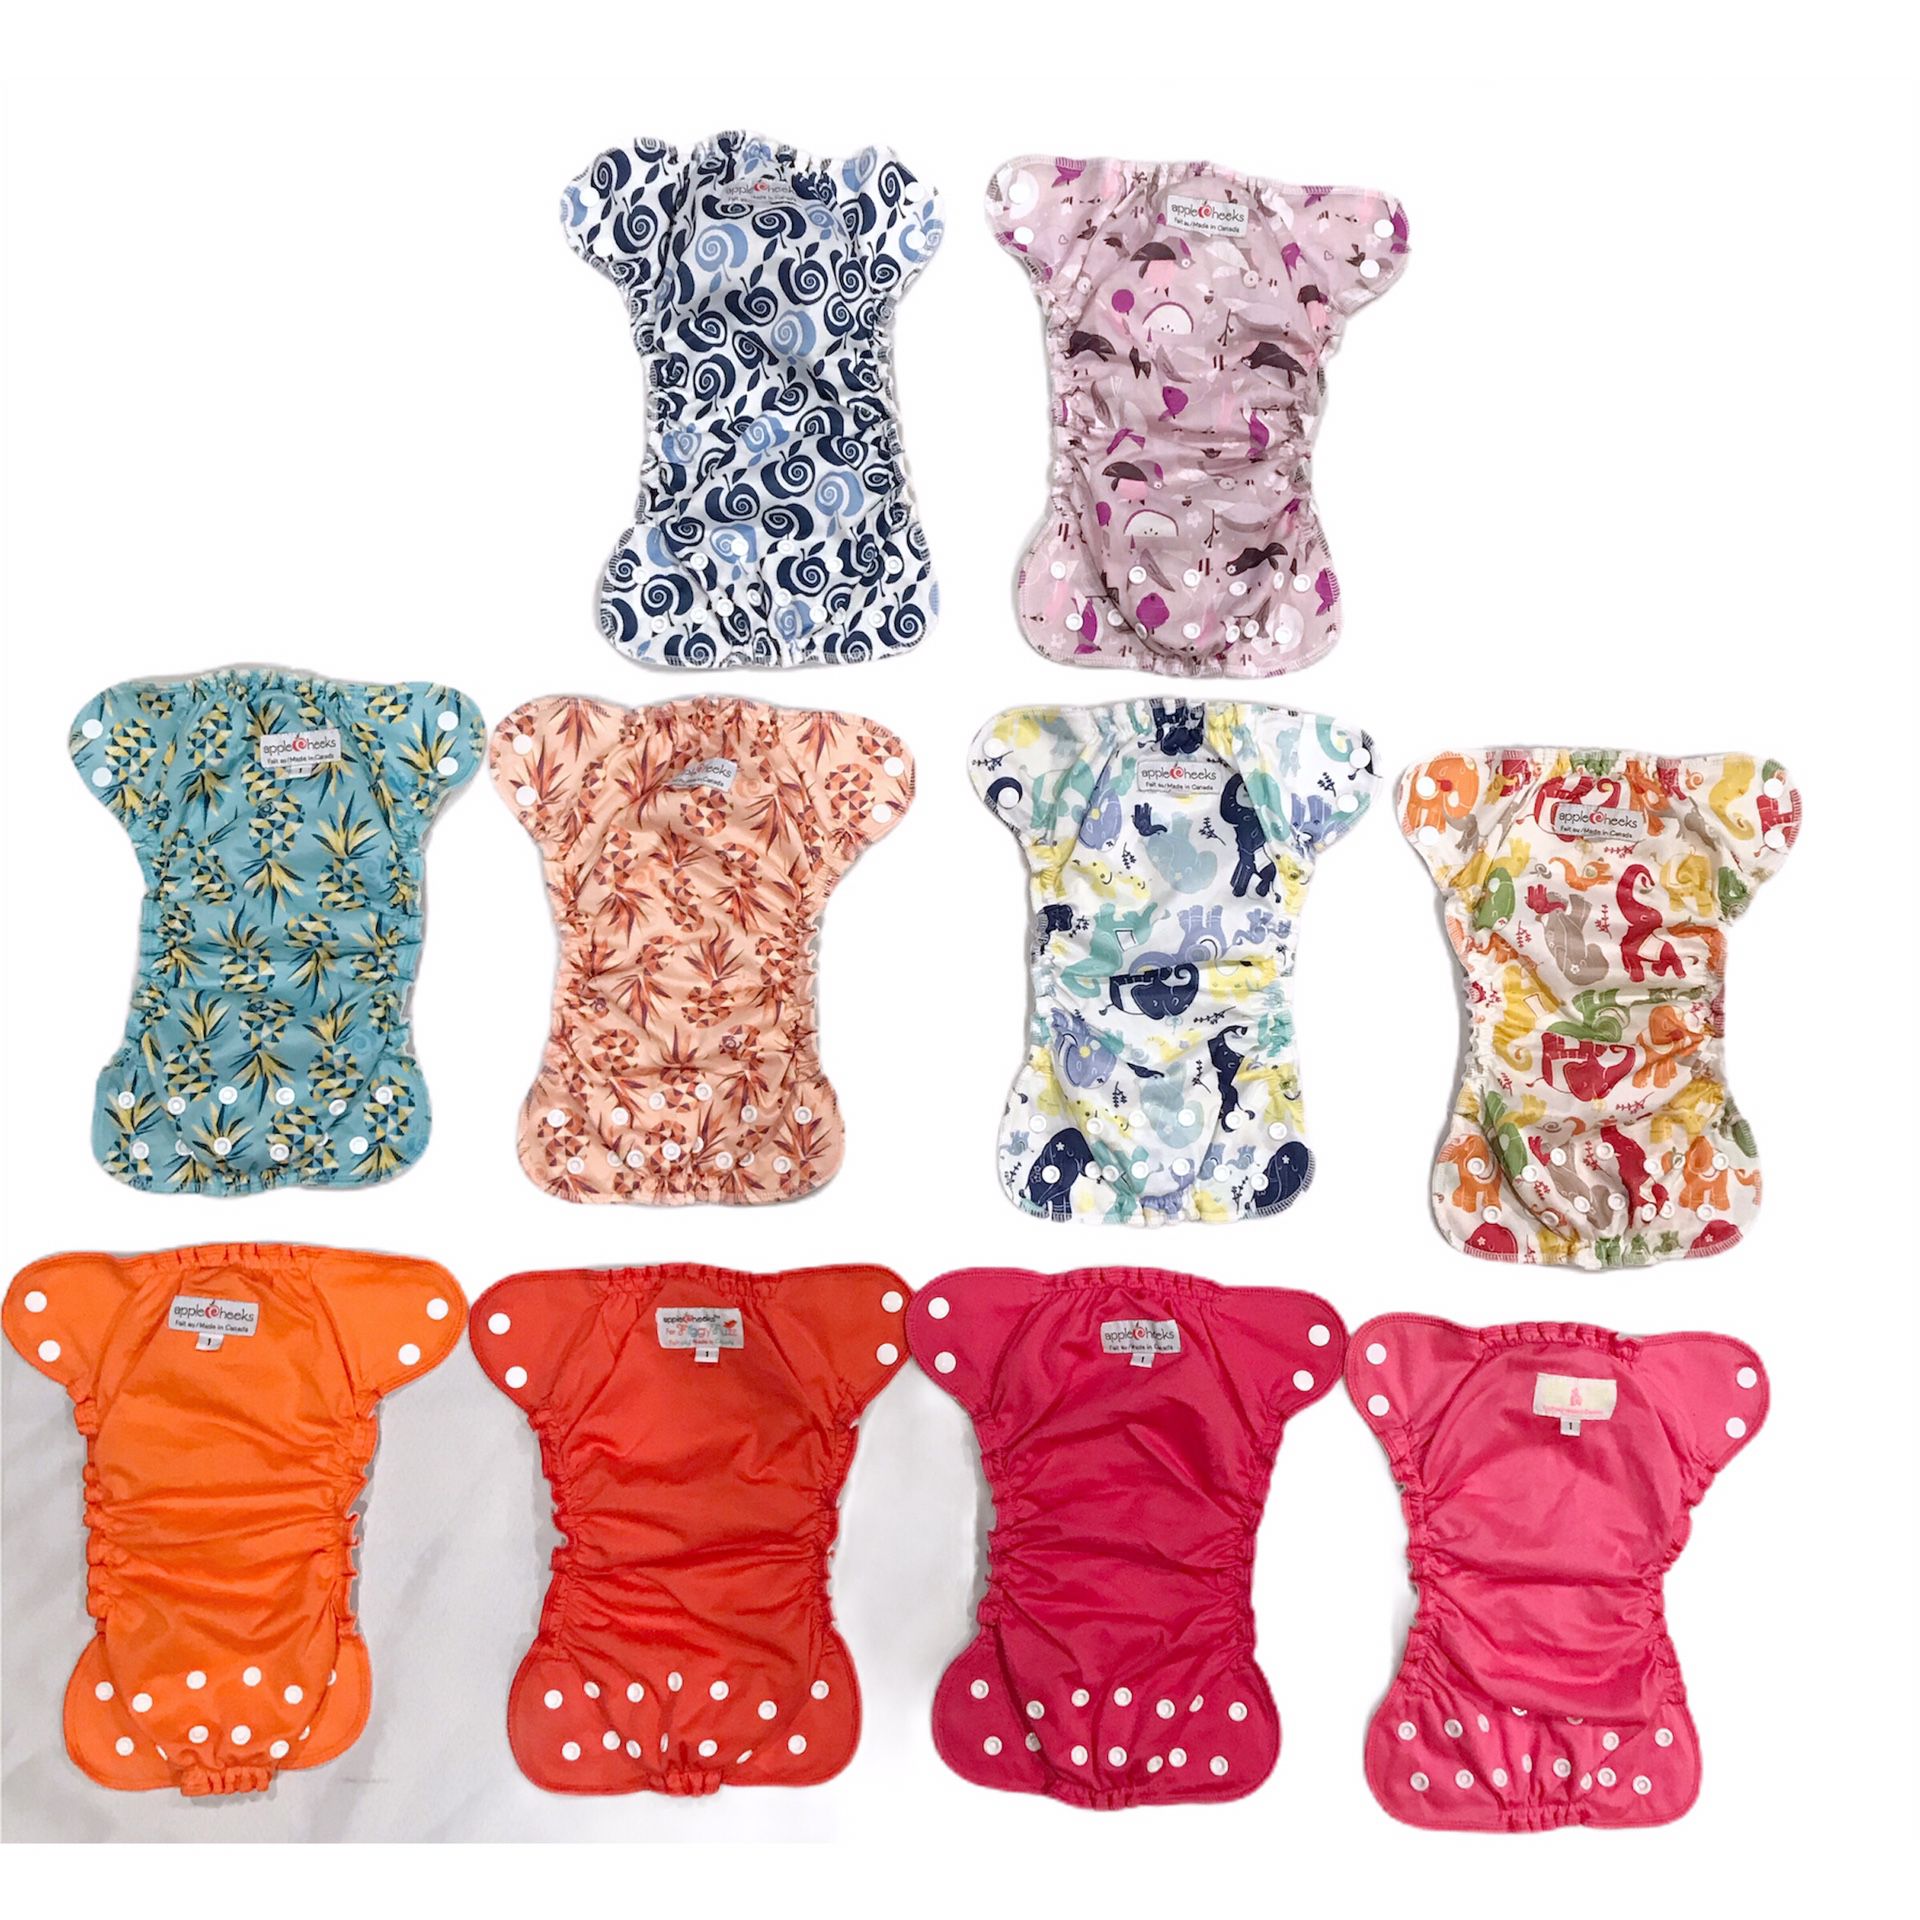 10 AppleCheeks Size 1 Diaper Covers for Kaye